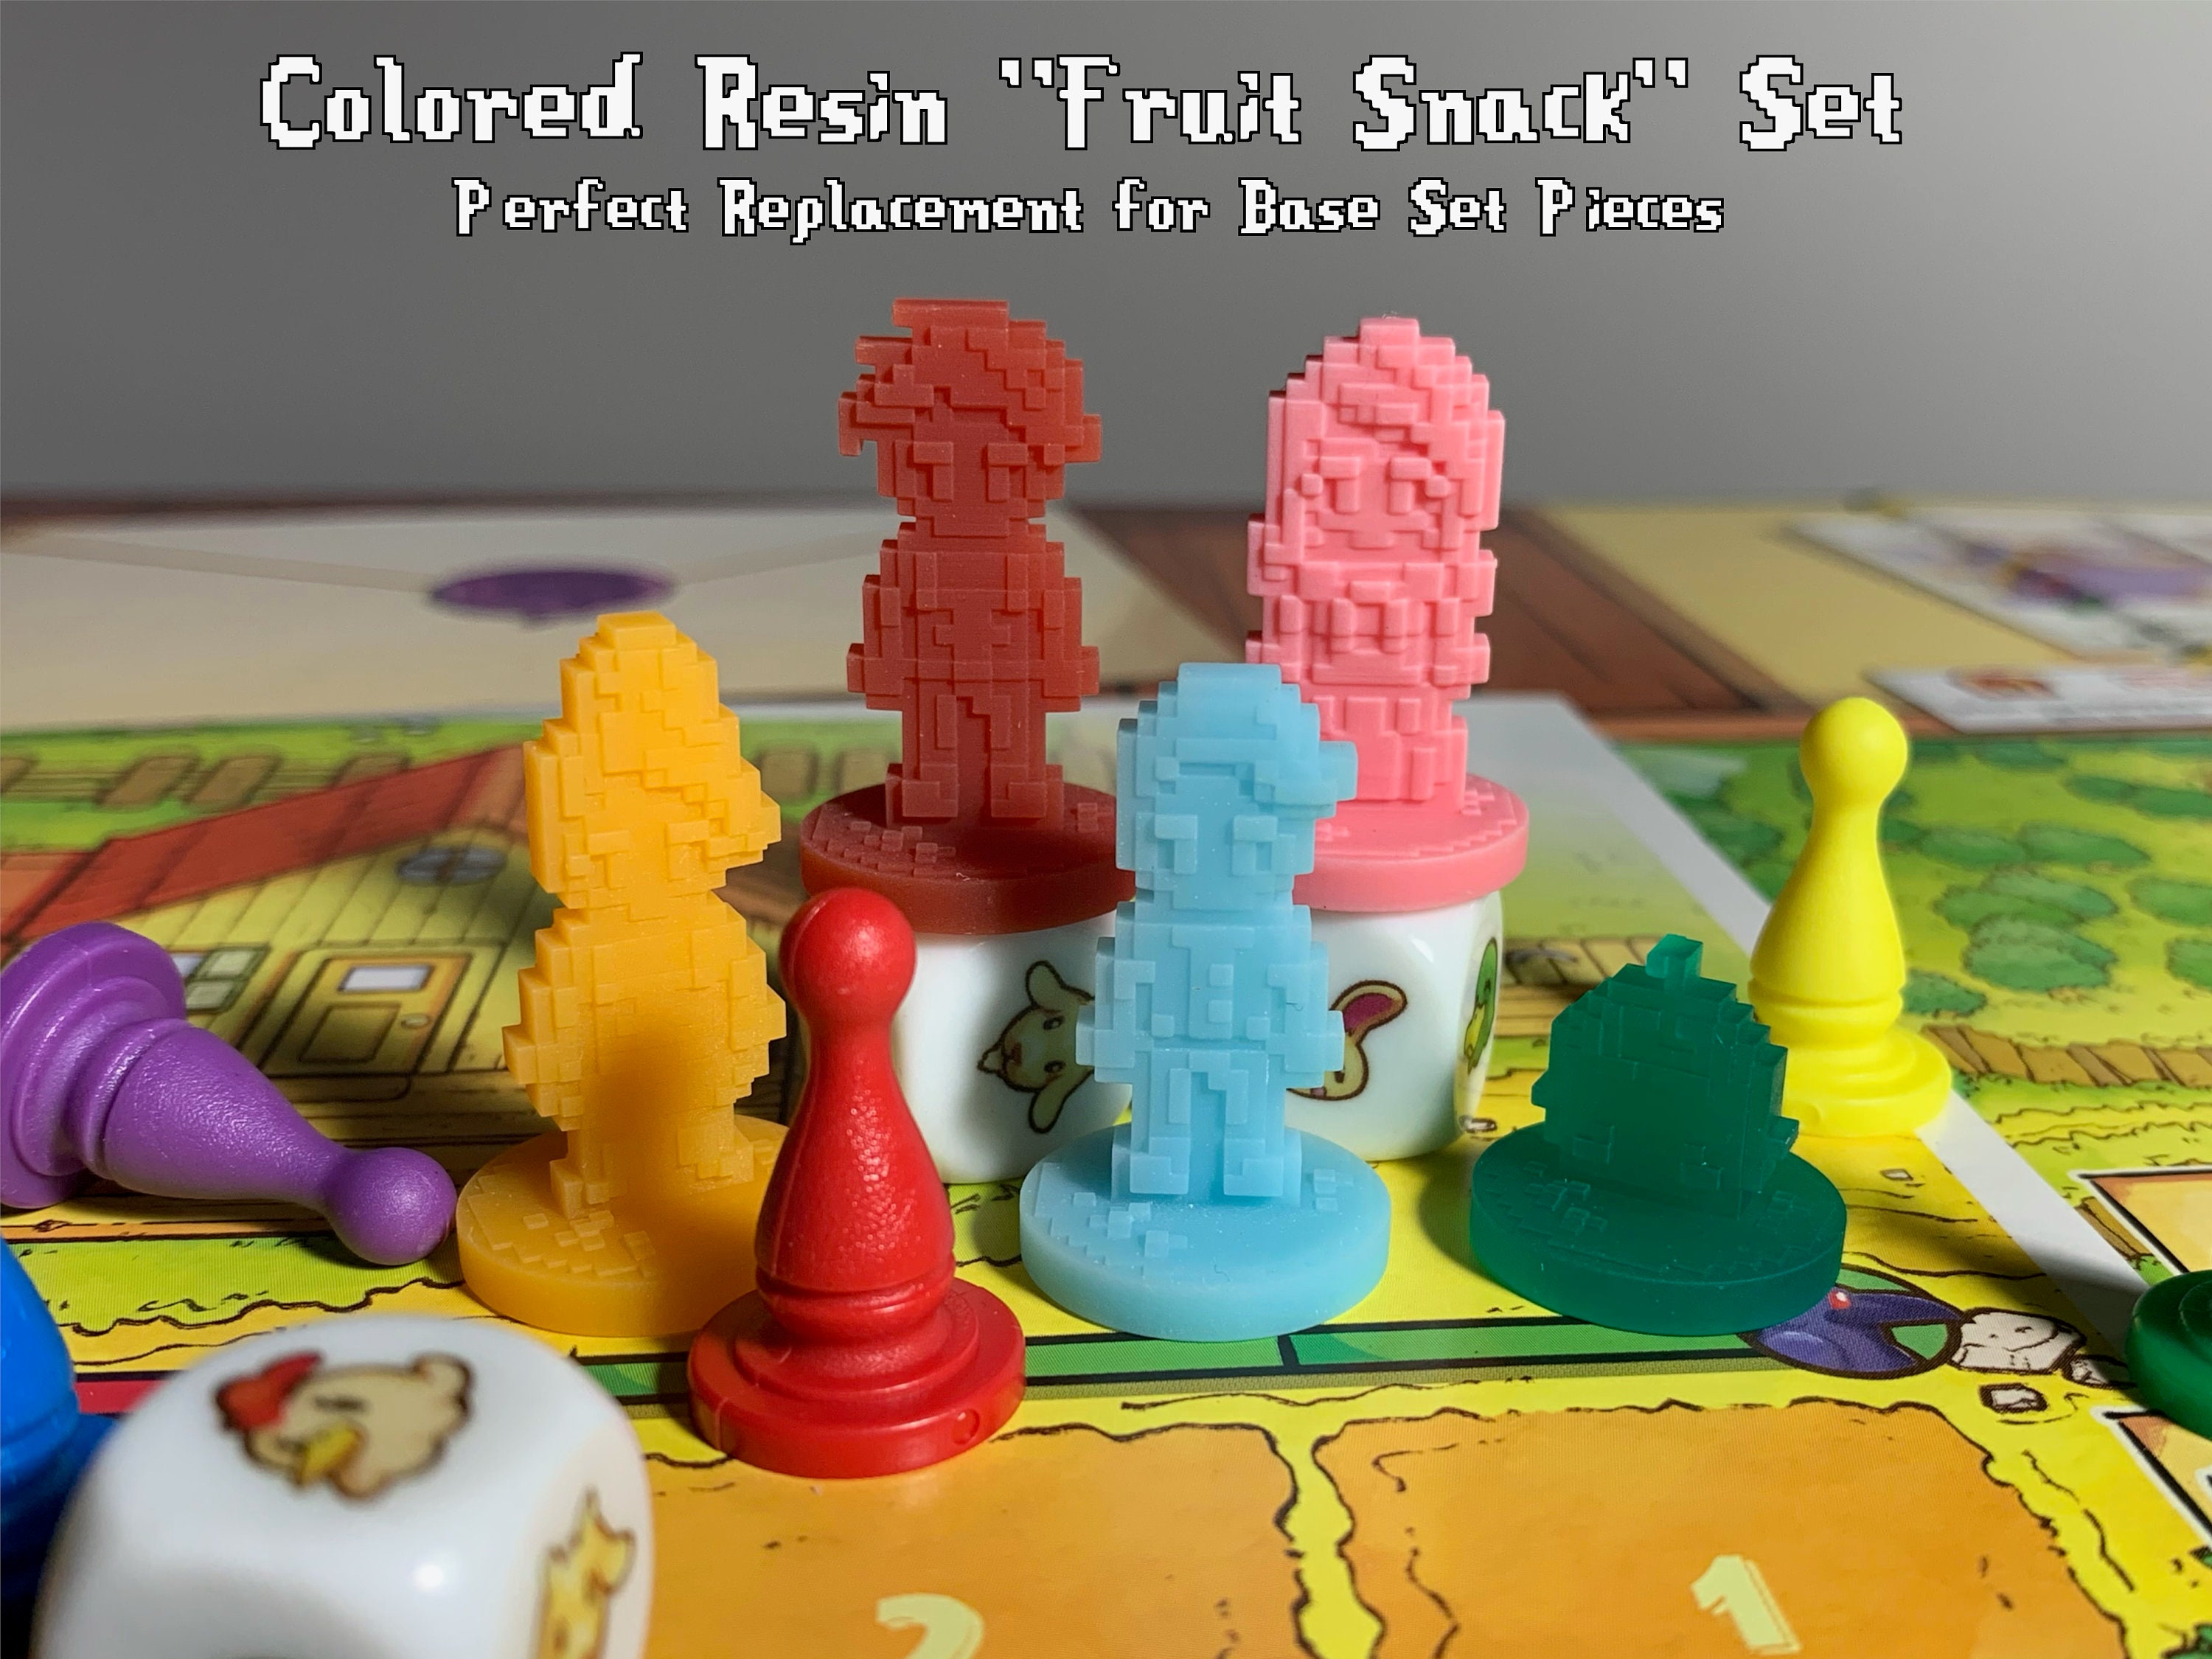 NEW Set of 60 Standard Board Game Pawns Playing Pieces - 6 Colors